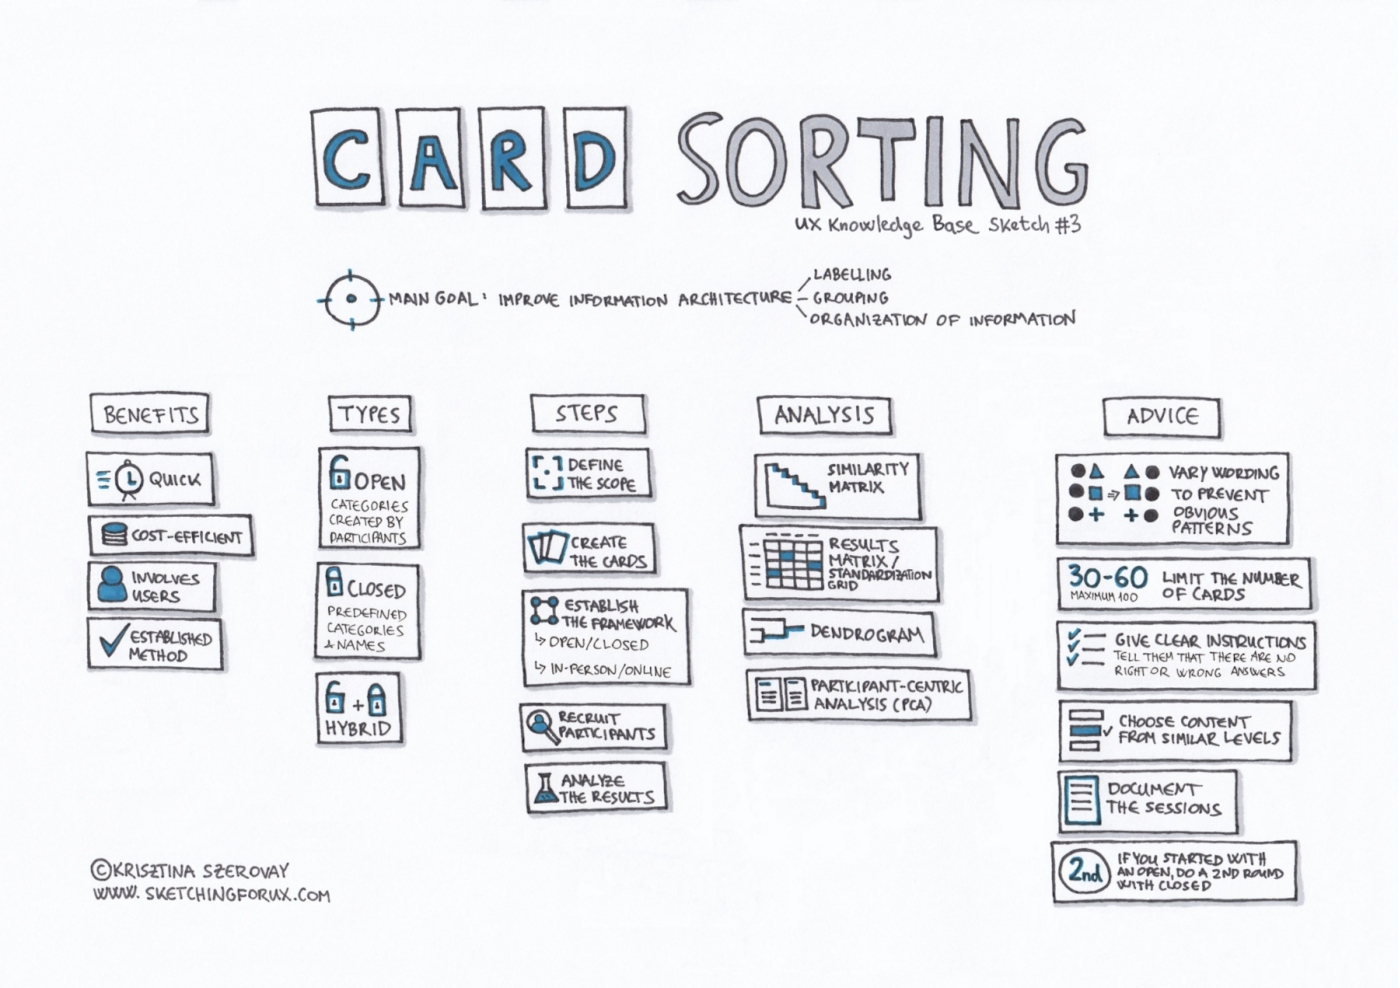 Card sorting technique